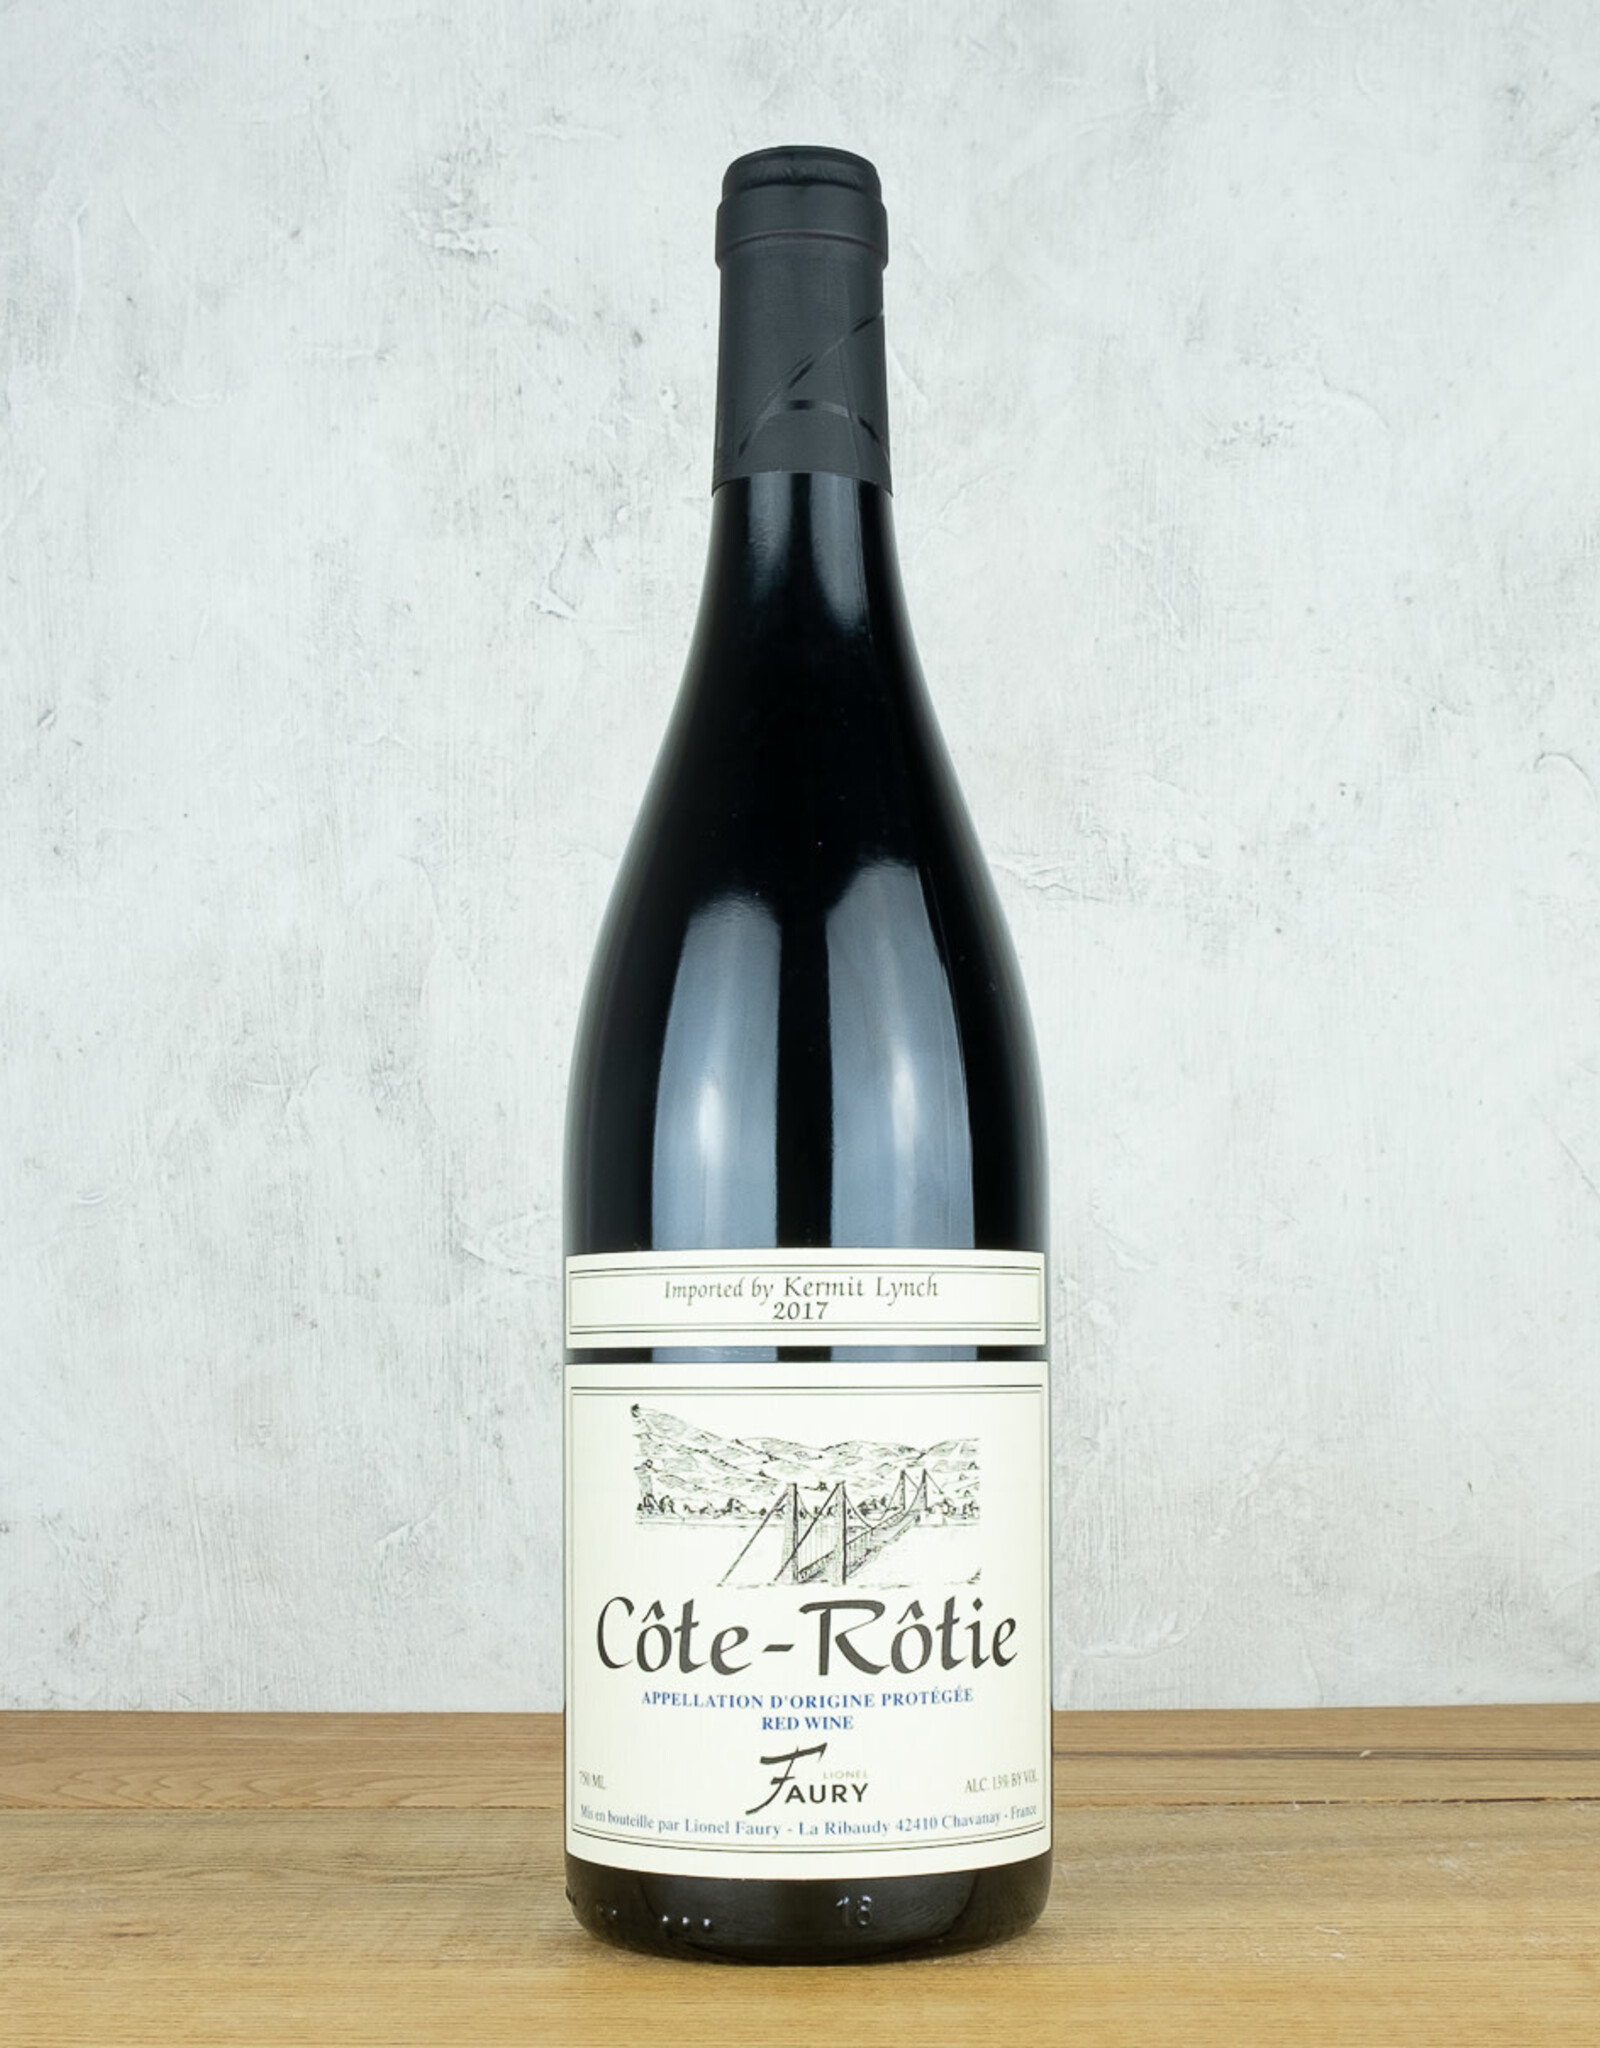 Faury Cote Rotie